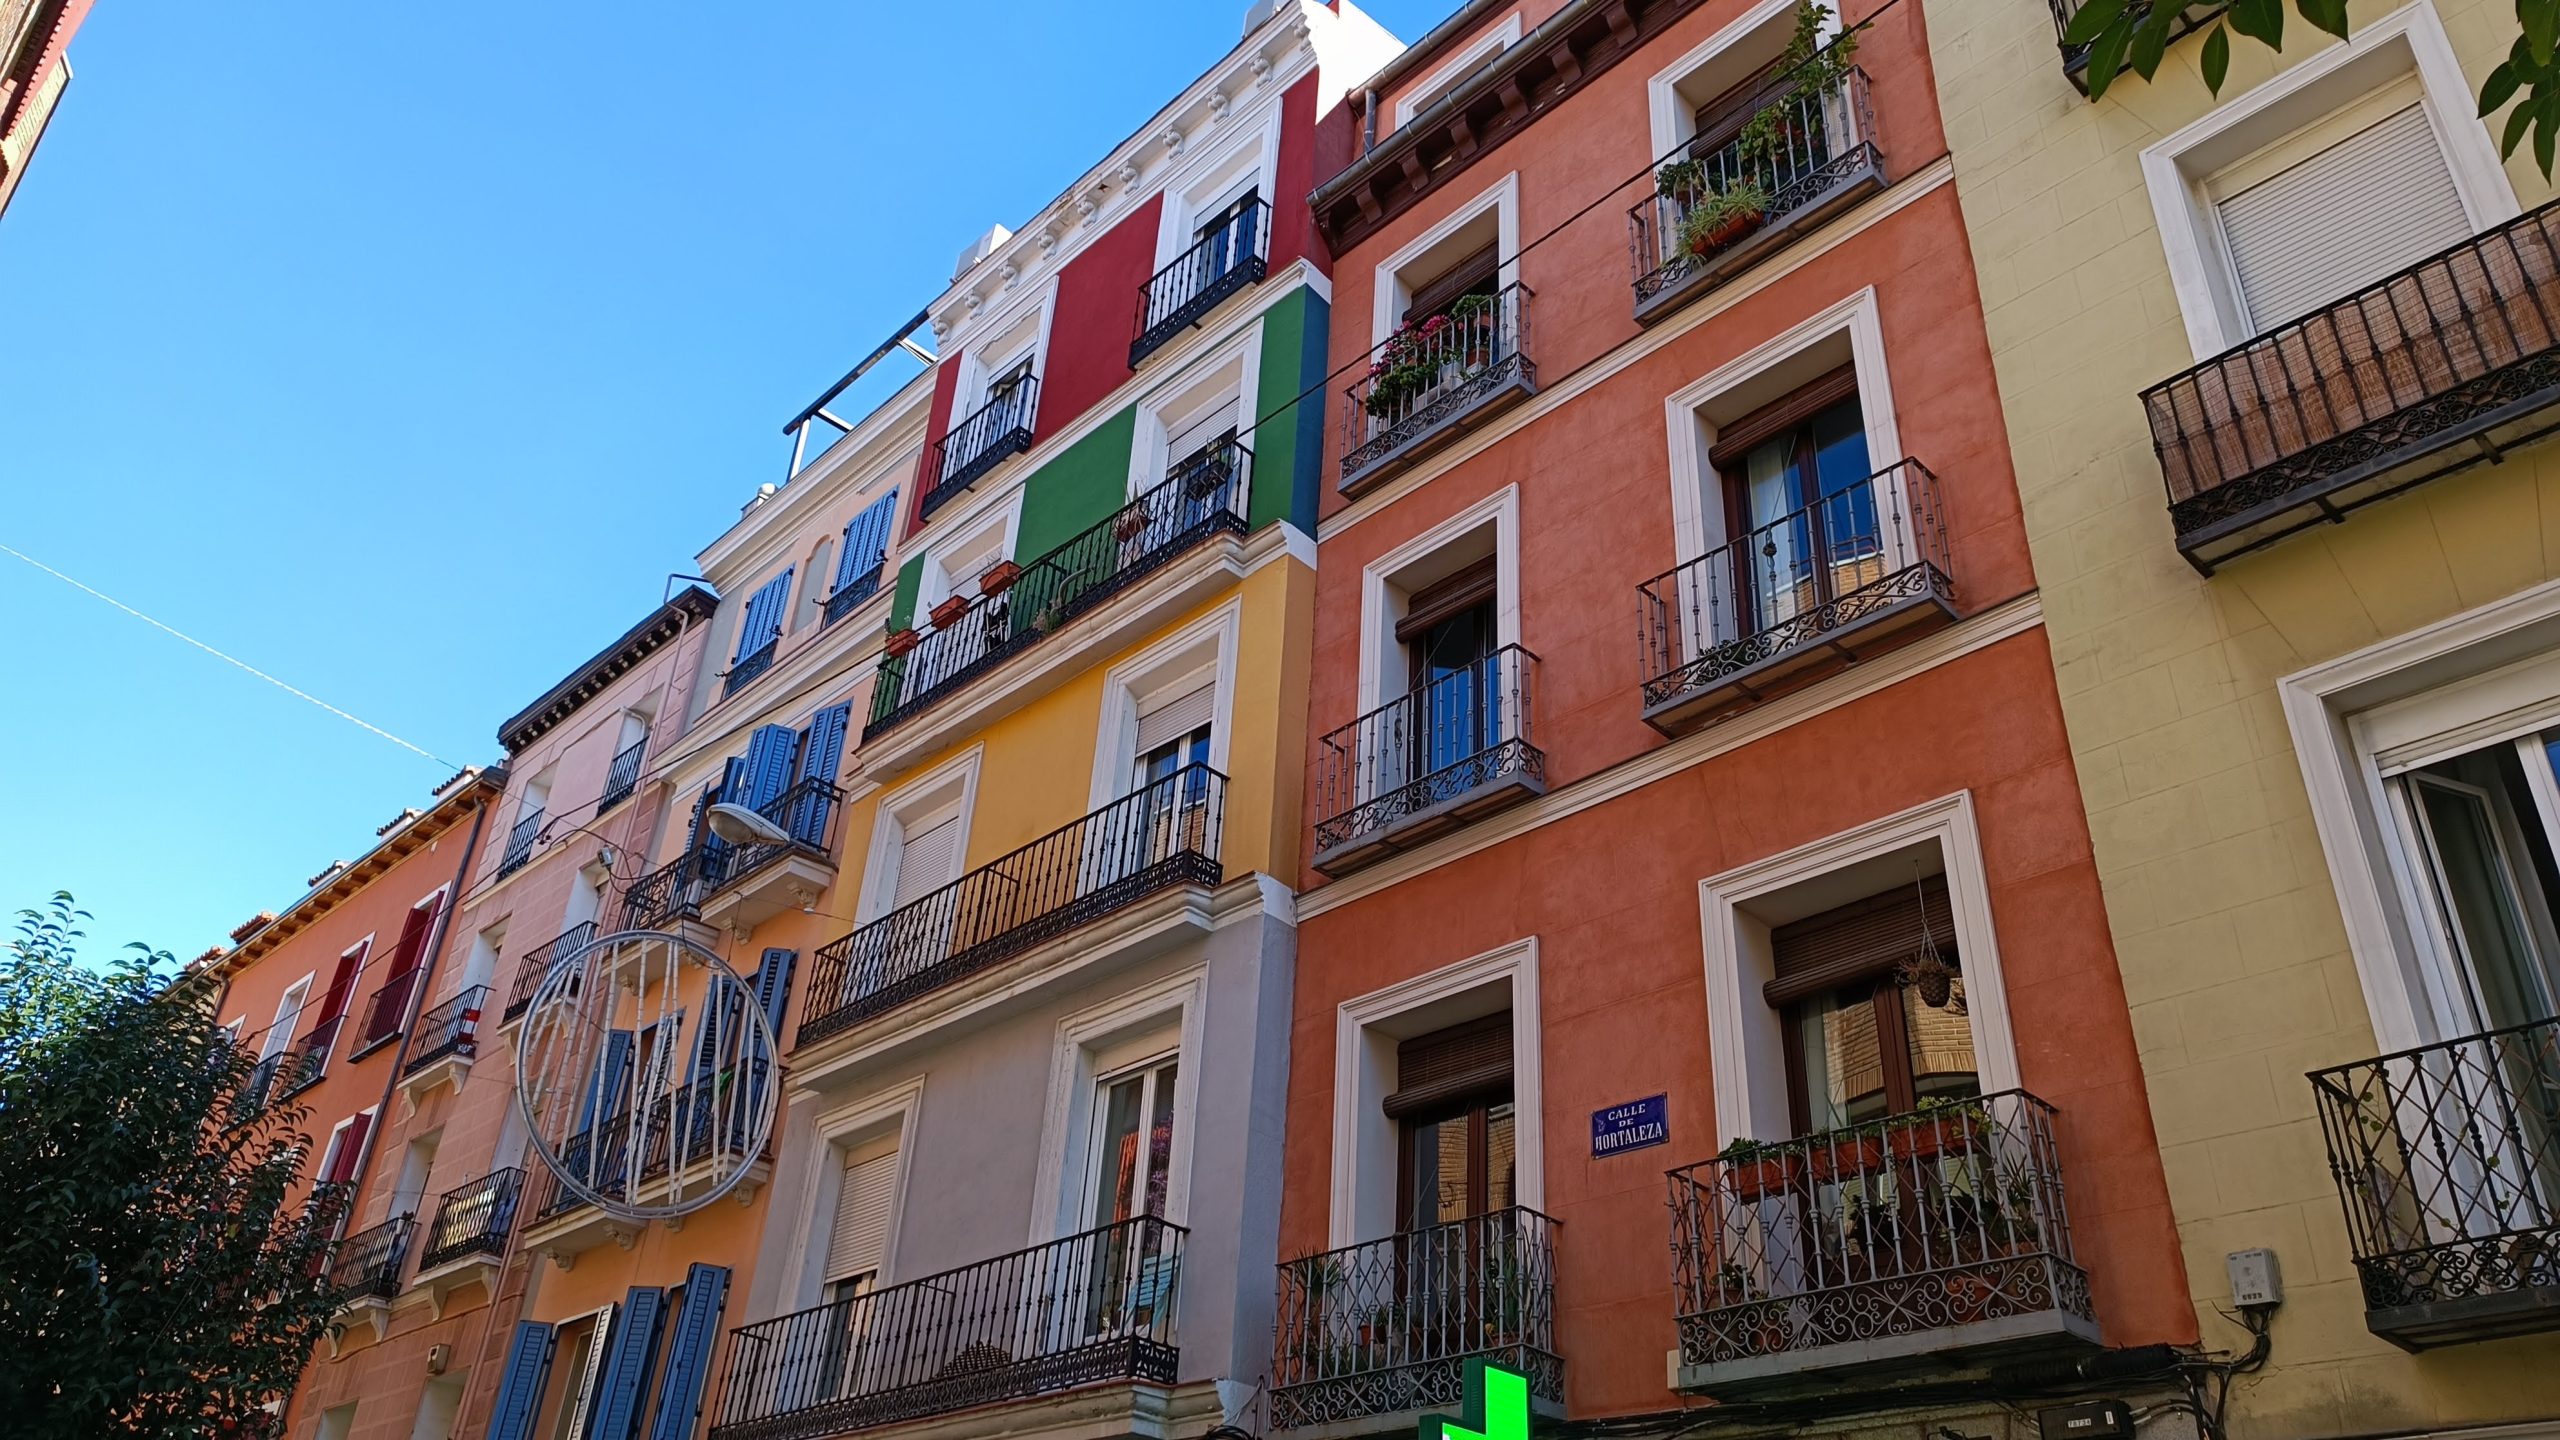 Situated north of Gran Vía and east of Malasaña, Chueca has a long-standing reputation as Madrid's gay area